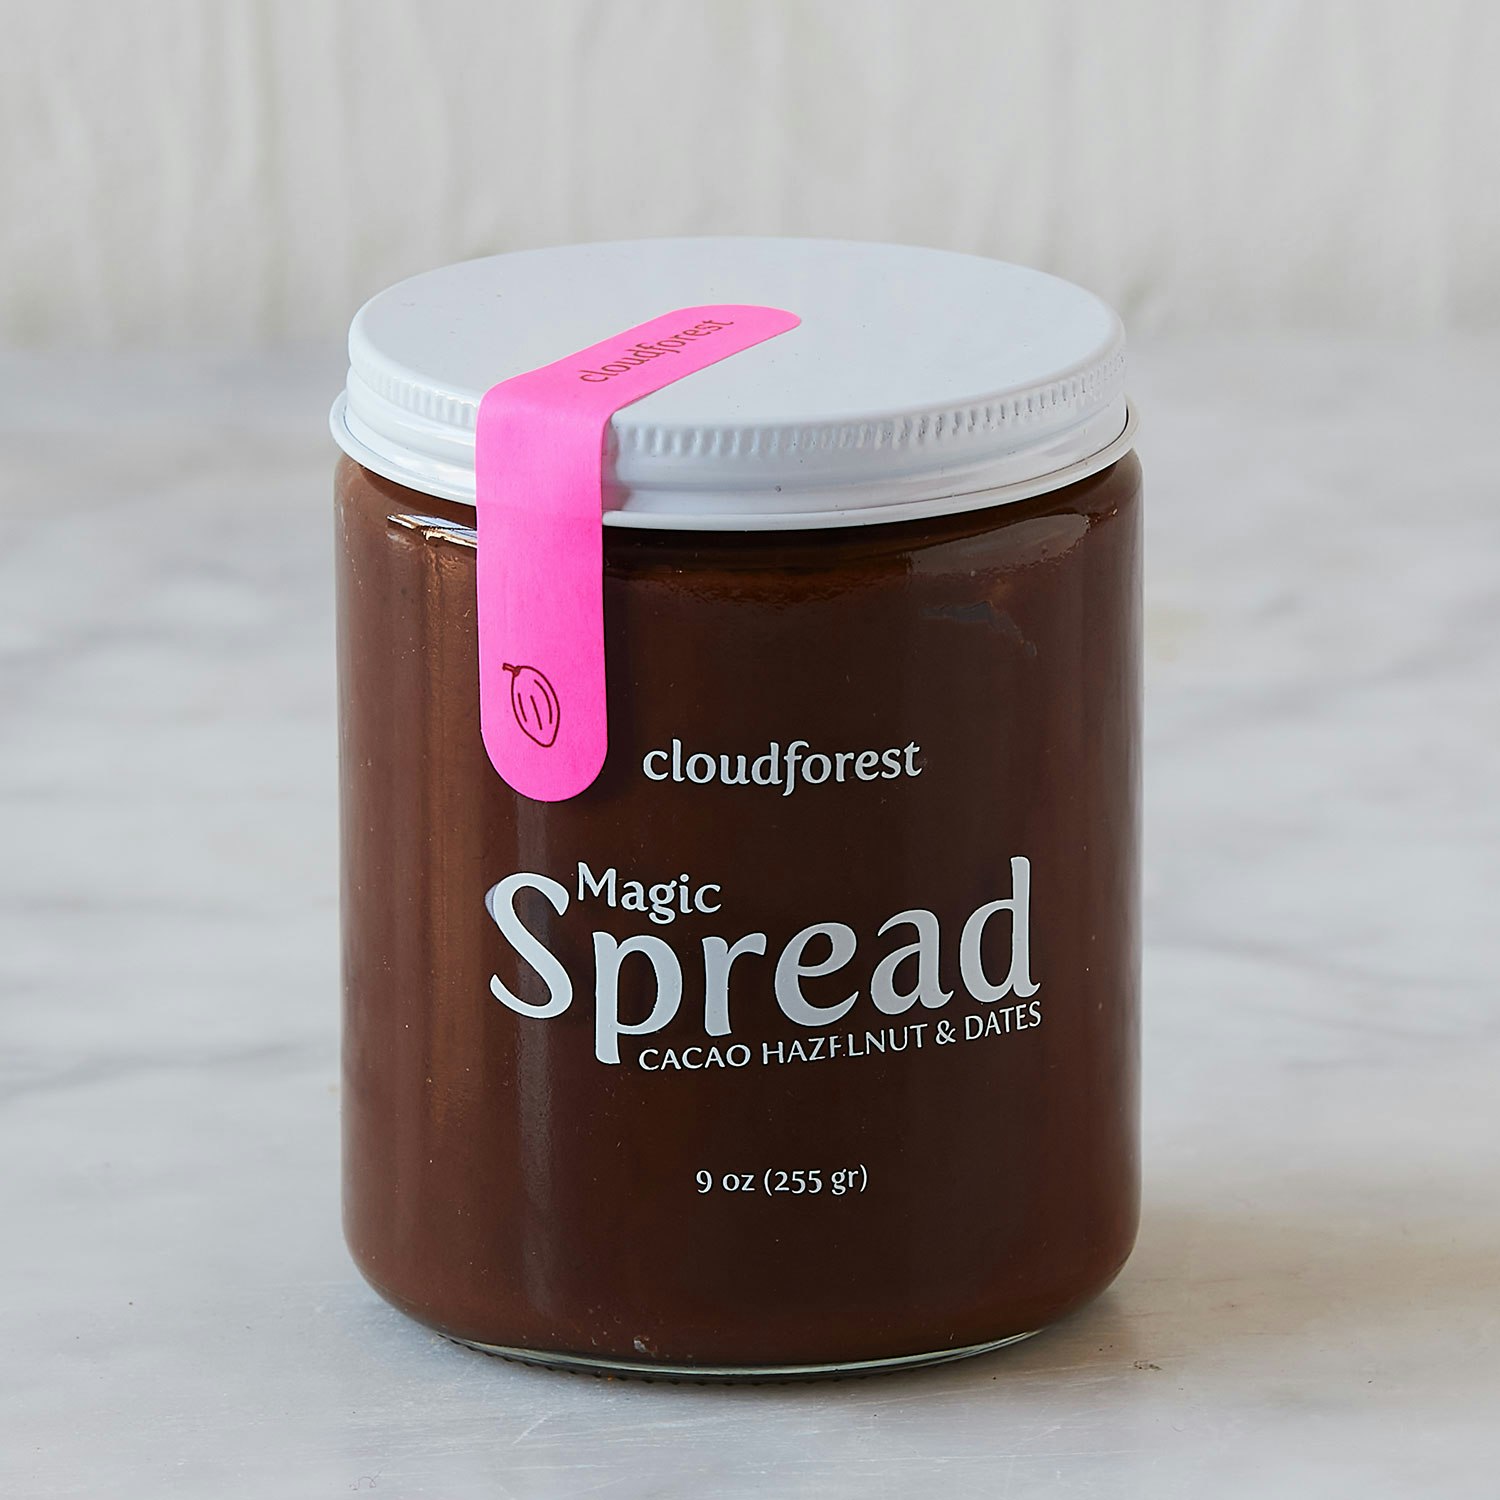 Cloudforest-Magic-Spread-specialty-foods-112253-01